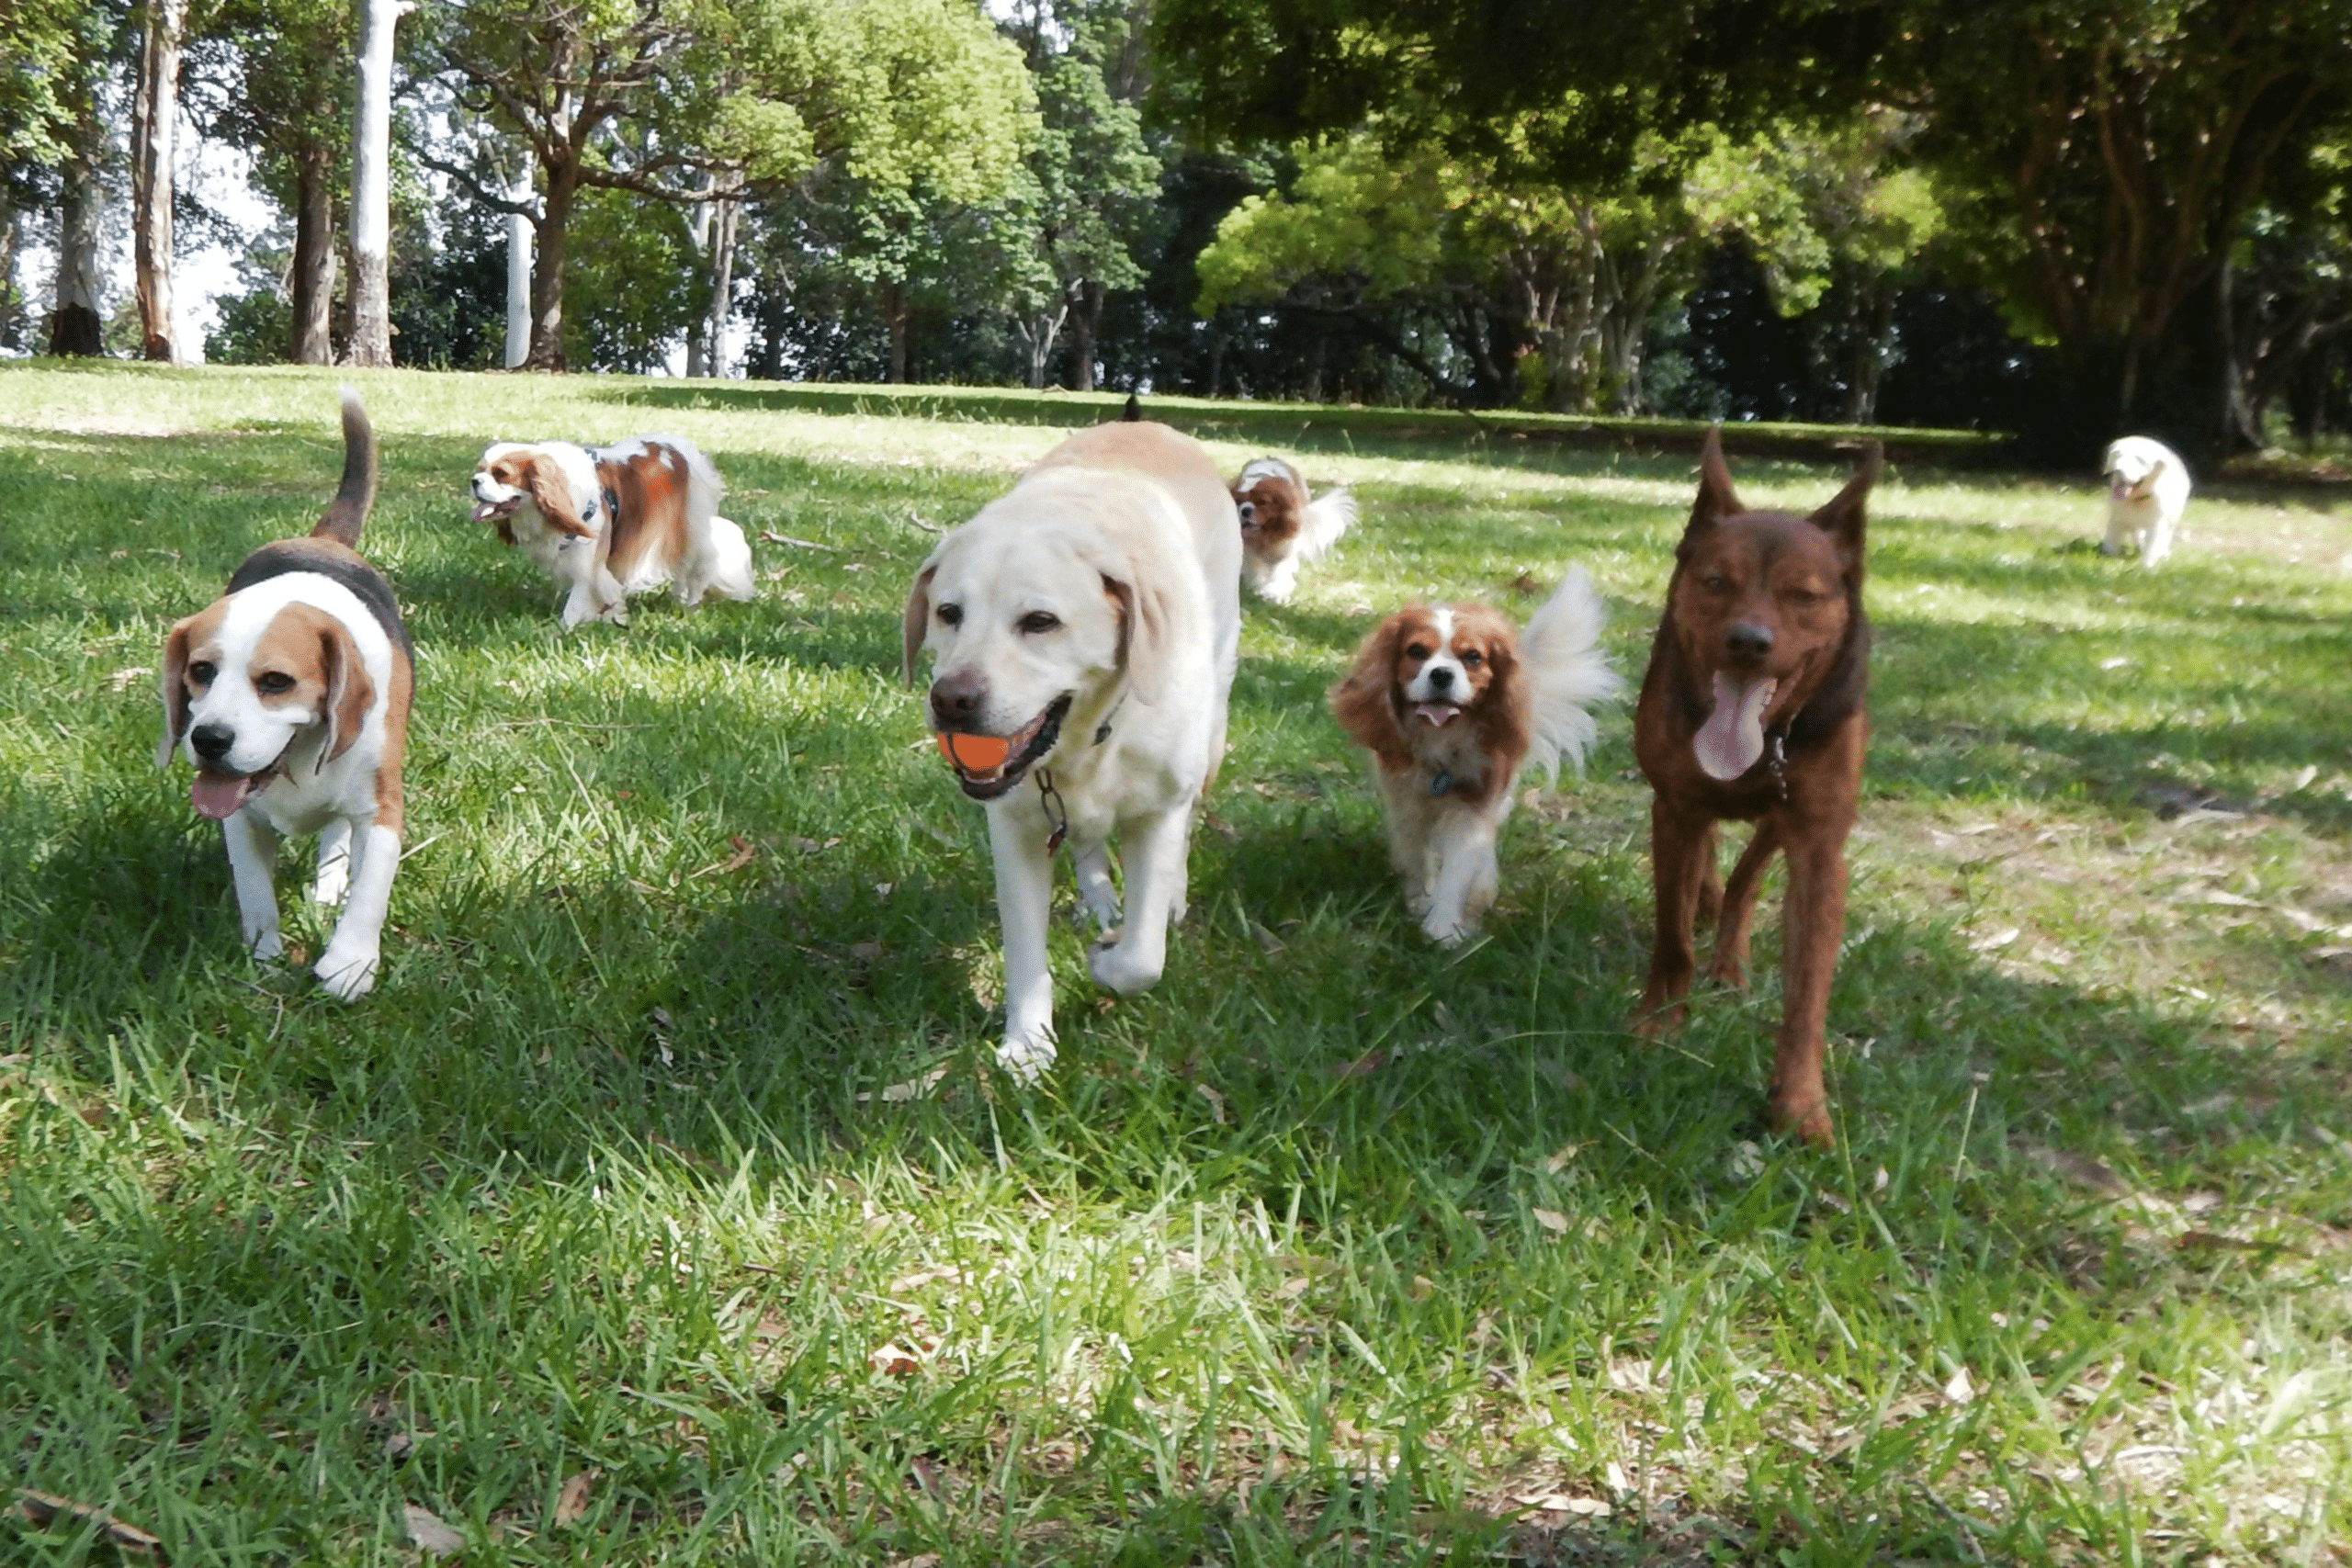 A group of dogs